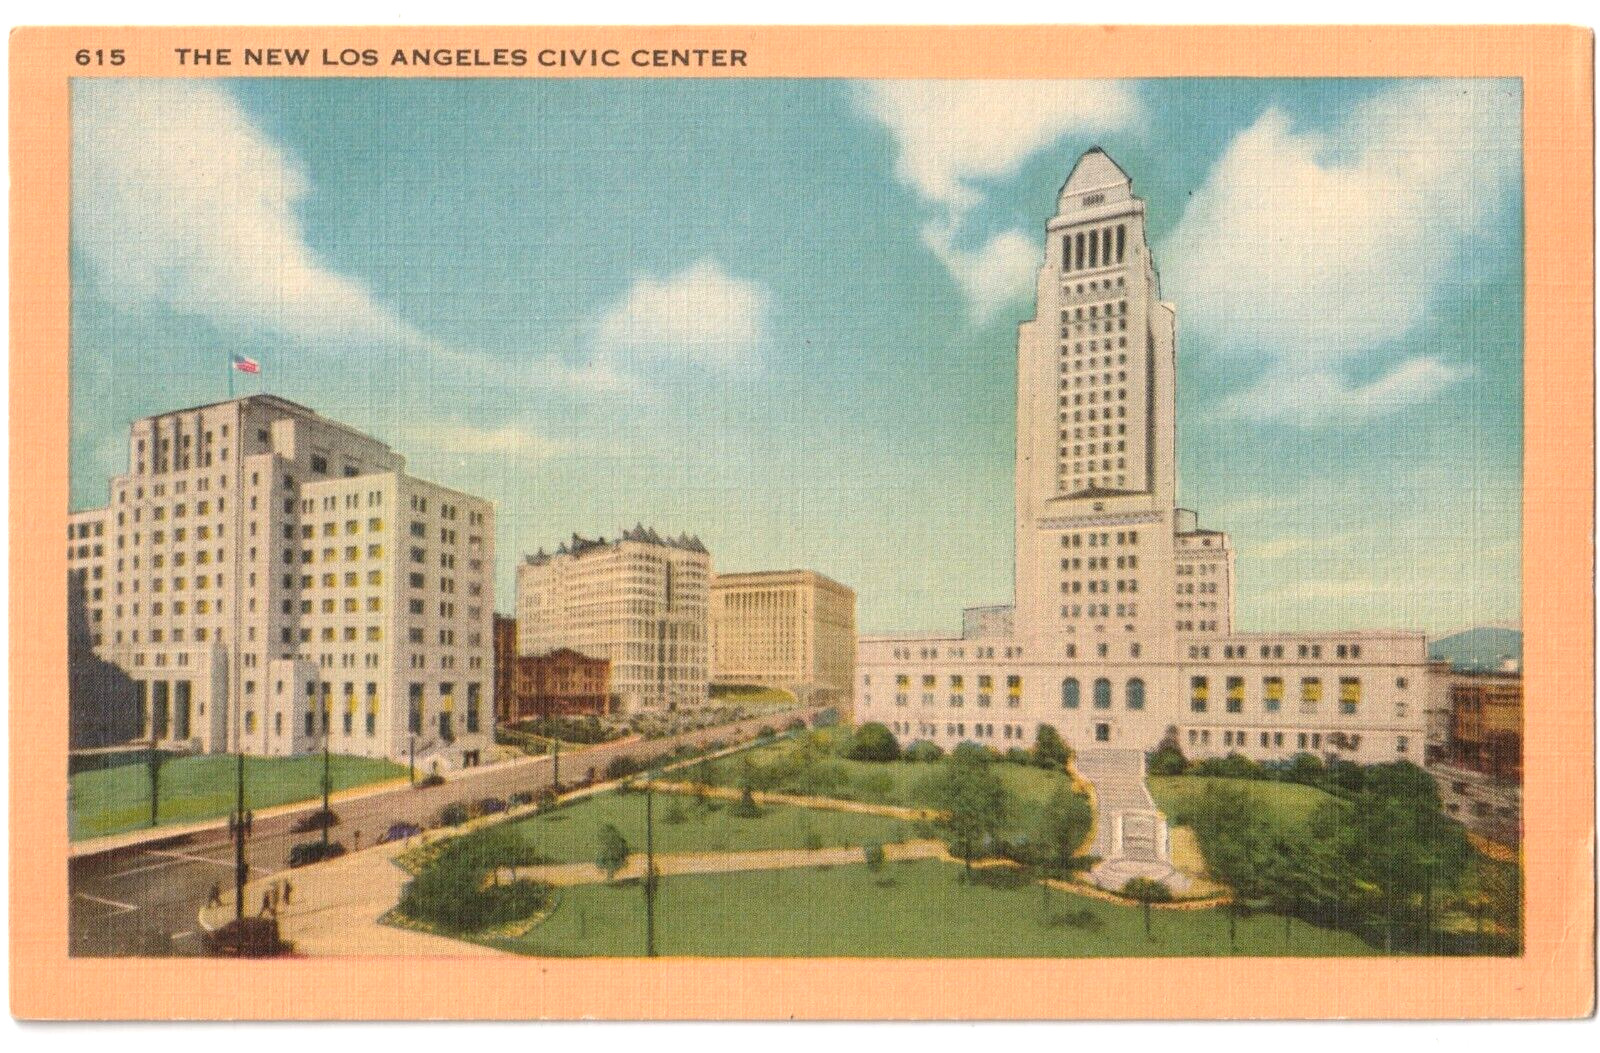 The New Civic Center-Los Angeles, California CA-unposted vintage postcard